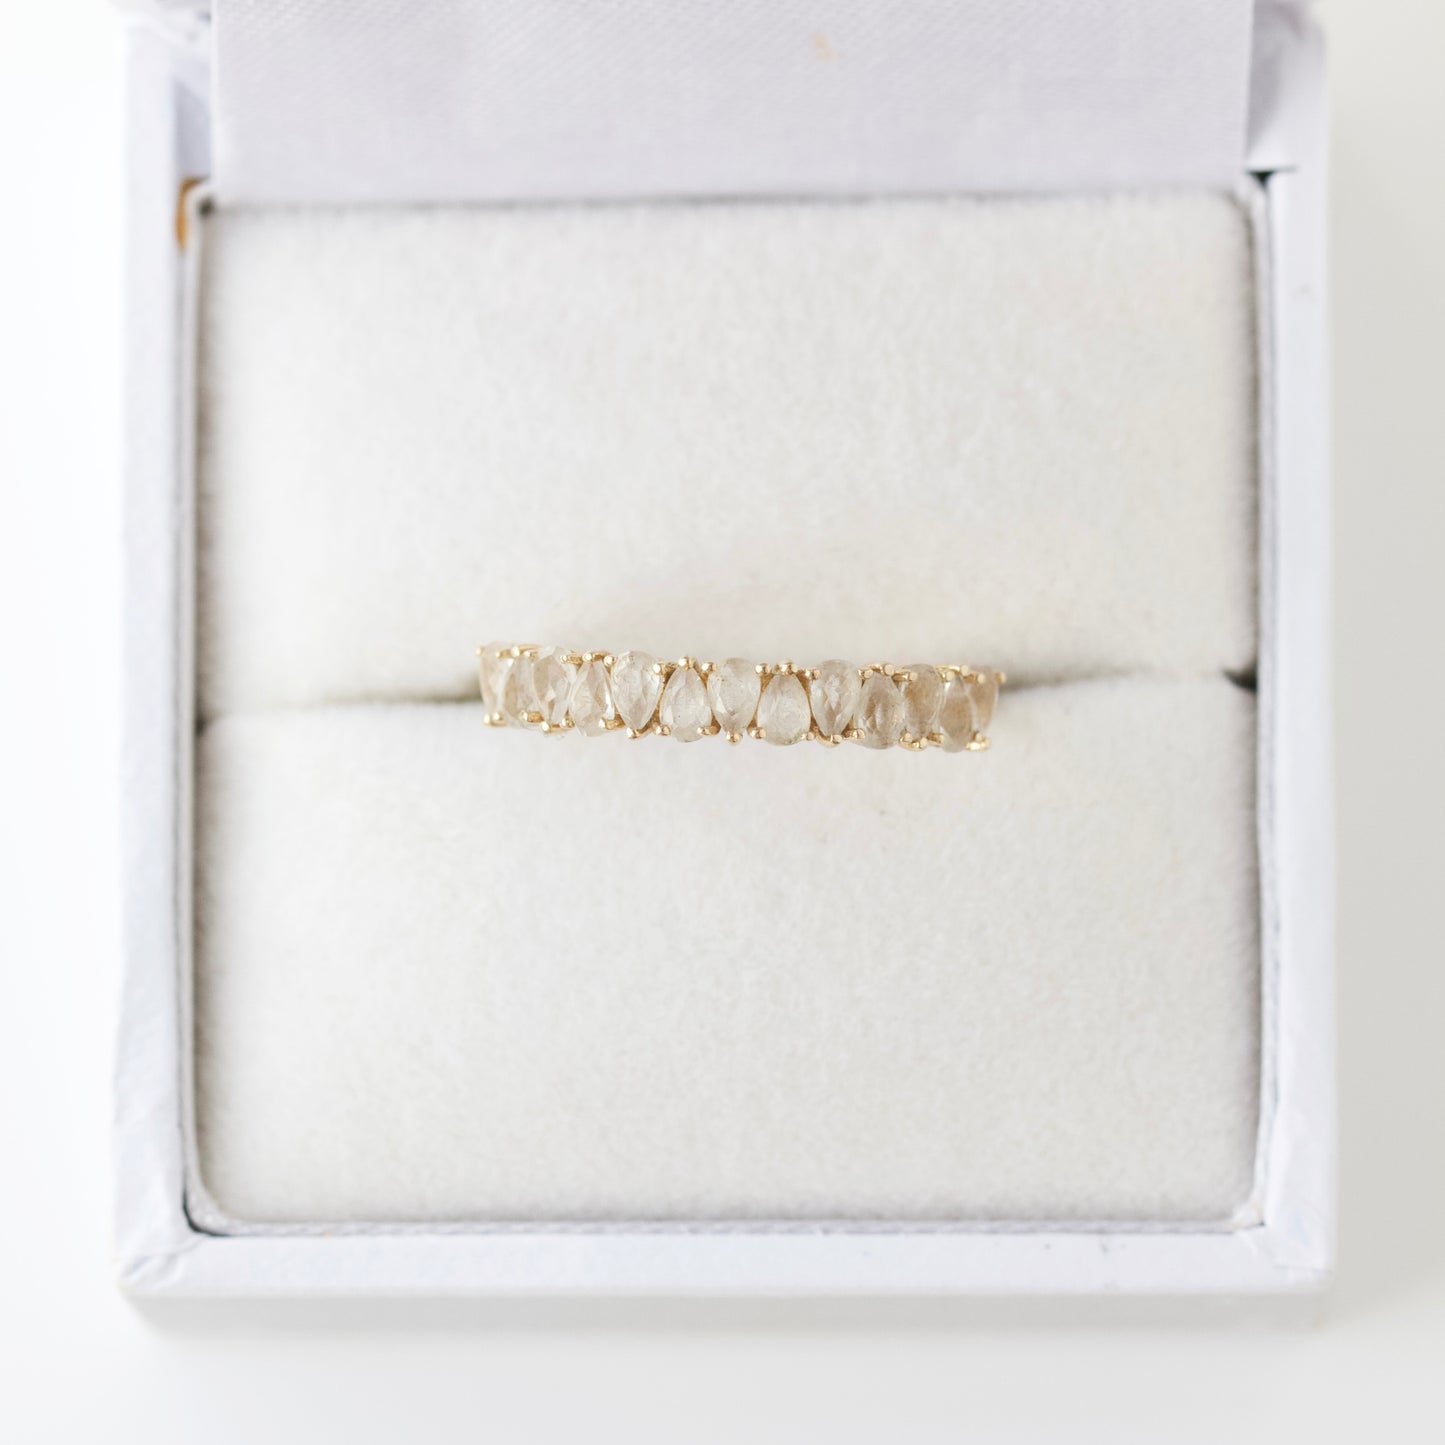 SAMPLE SALE- White Topaz Ring in 14k Solid Yellow Gold- Size UK O